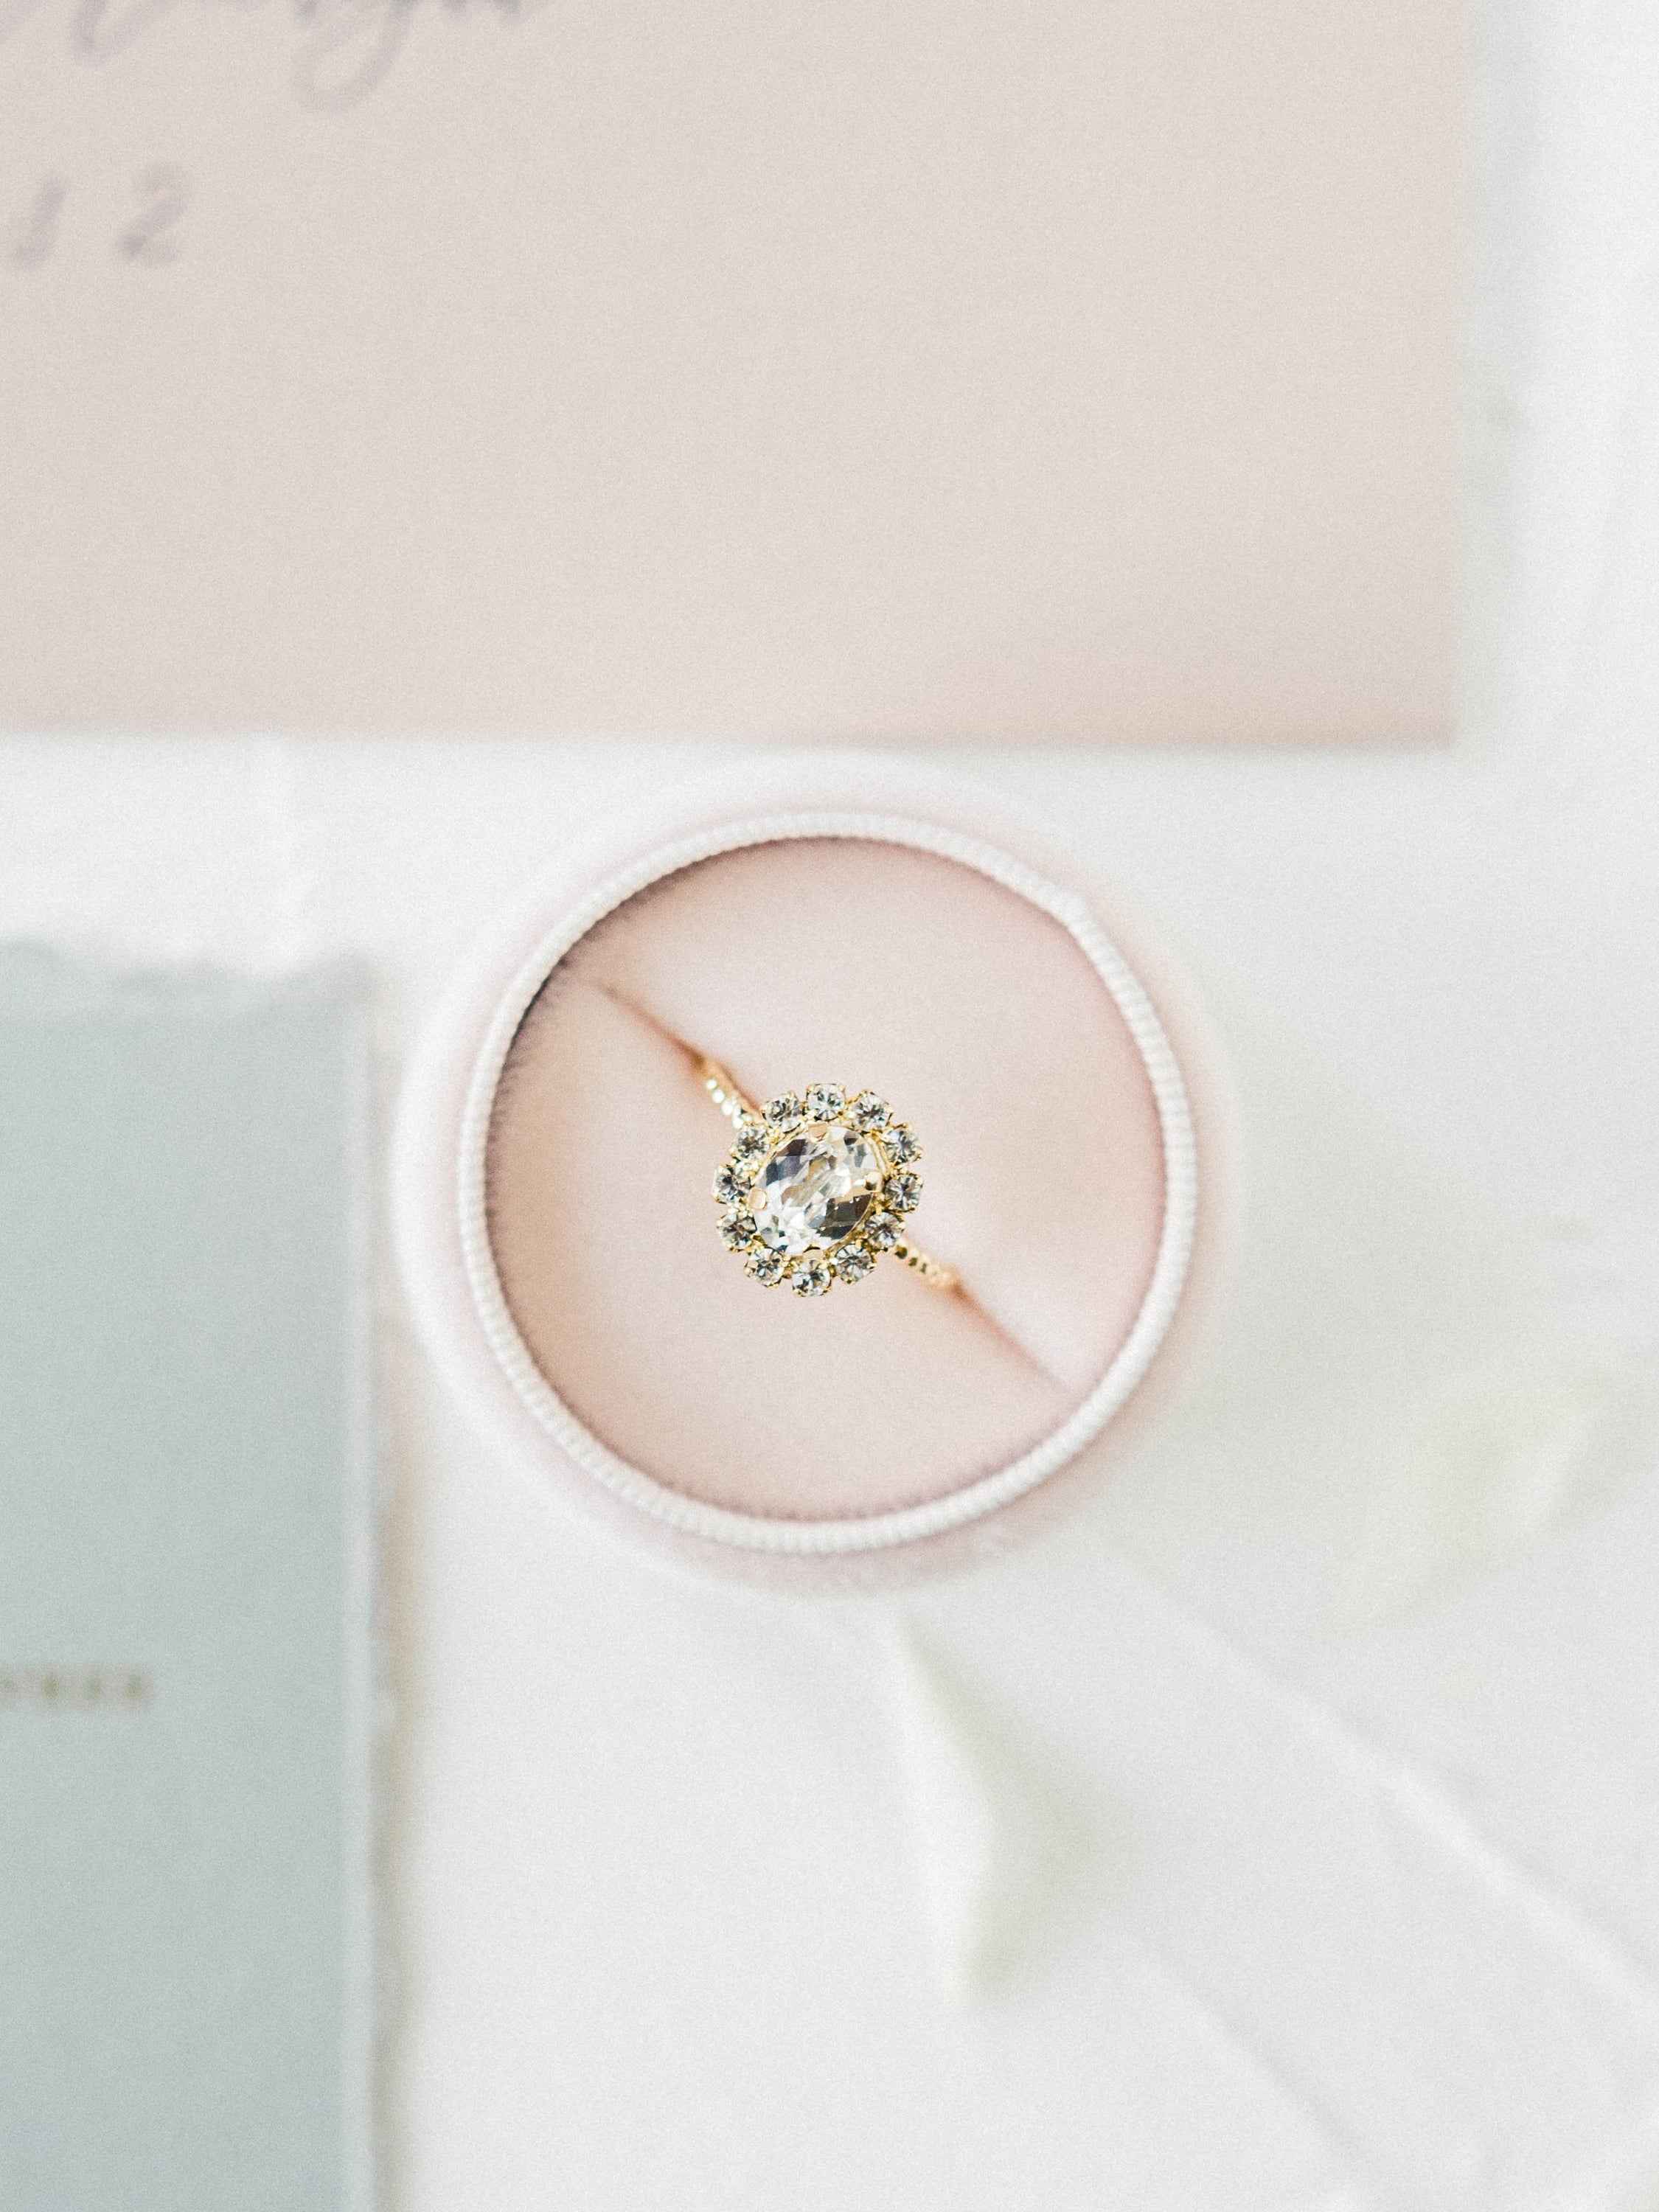 Duchess Ring, jewelry designed with Glamour, royalty and elegance in mind by Sarah Gauci in Malta. Crystal Clear. 18K gold plated or Rose Gold Plated. 